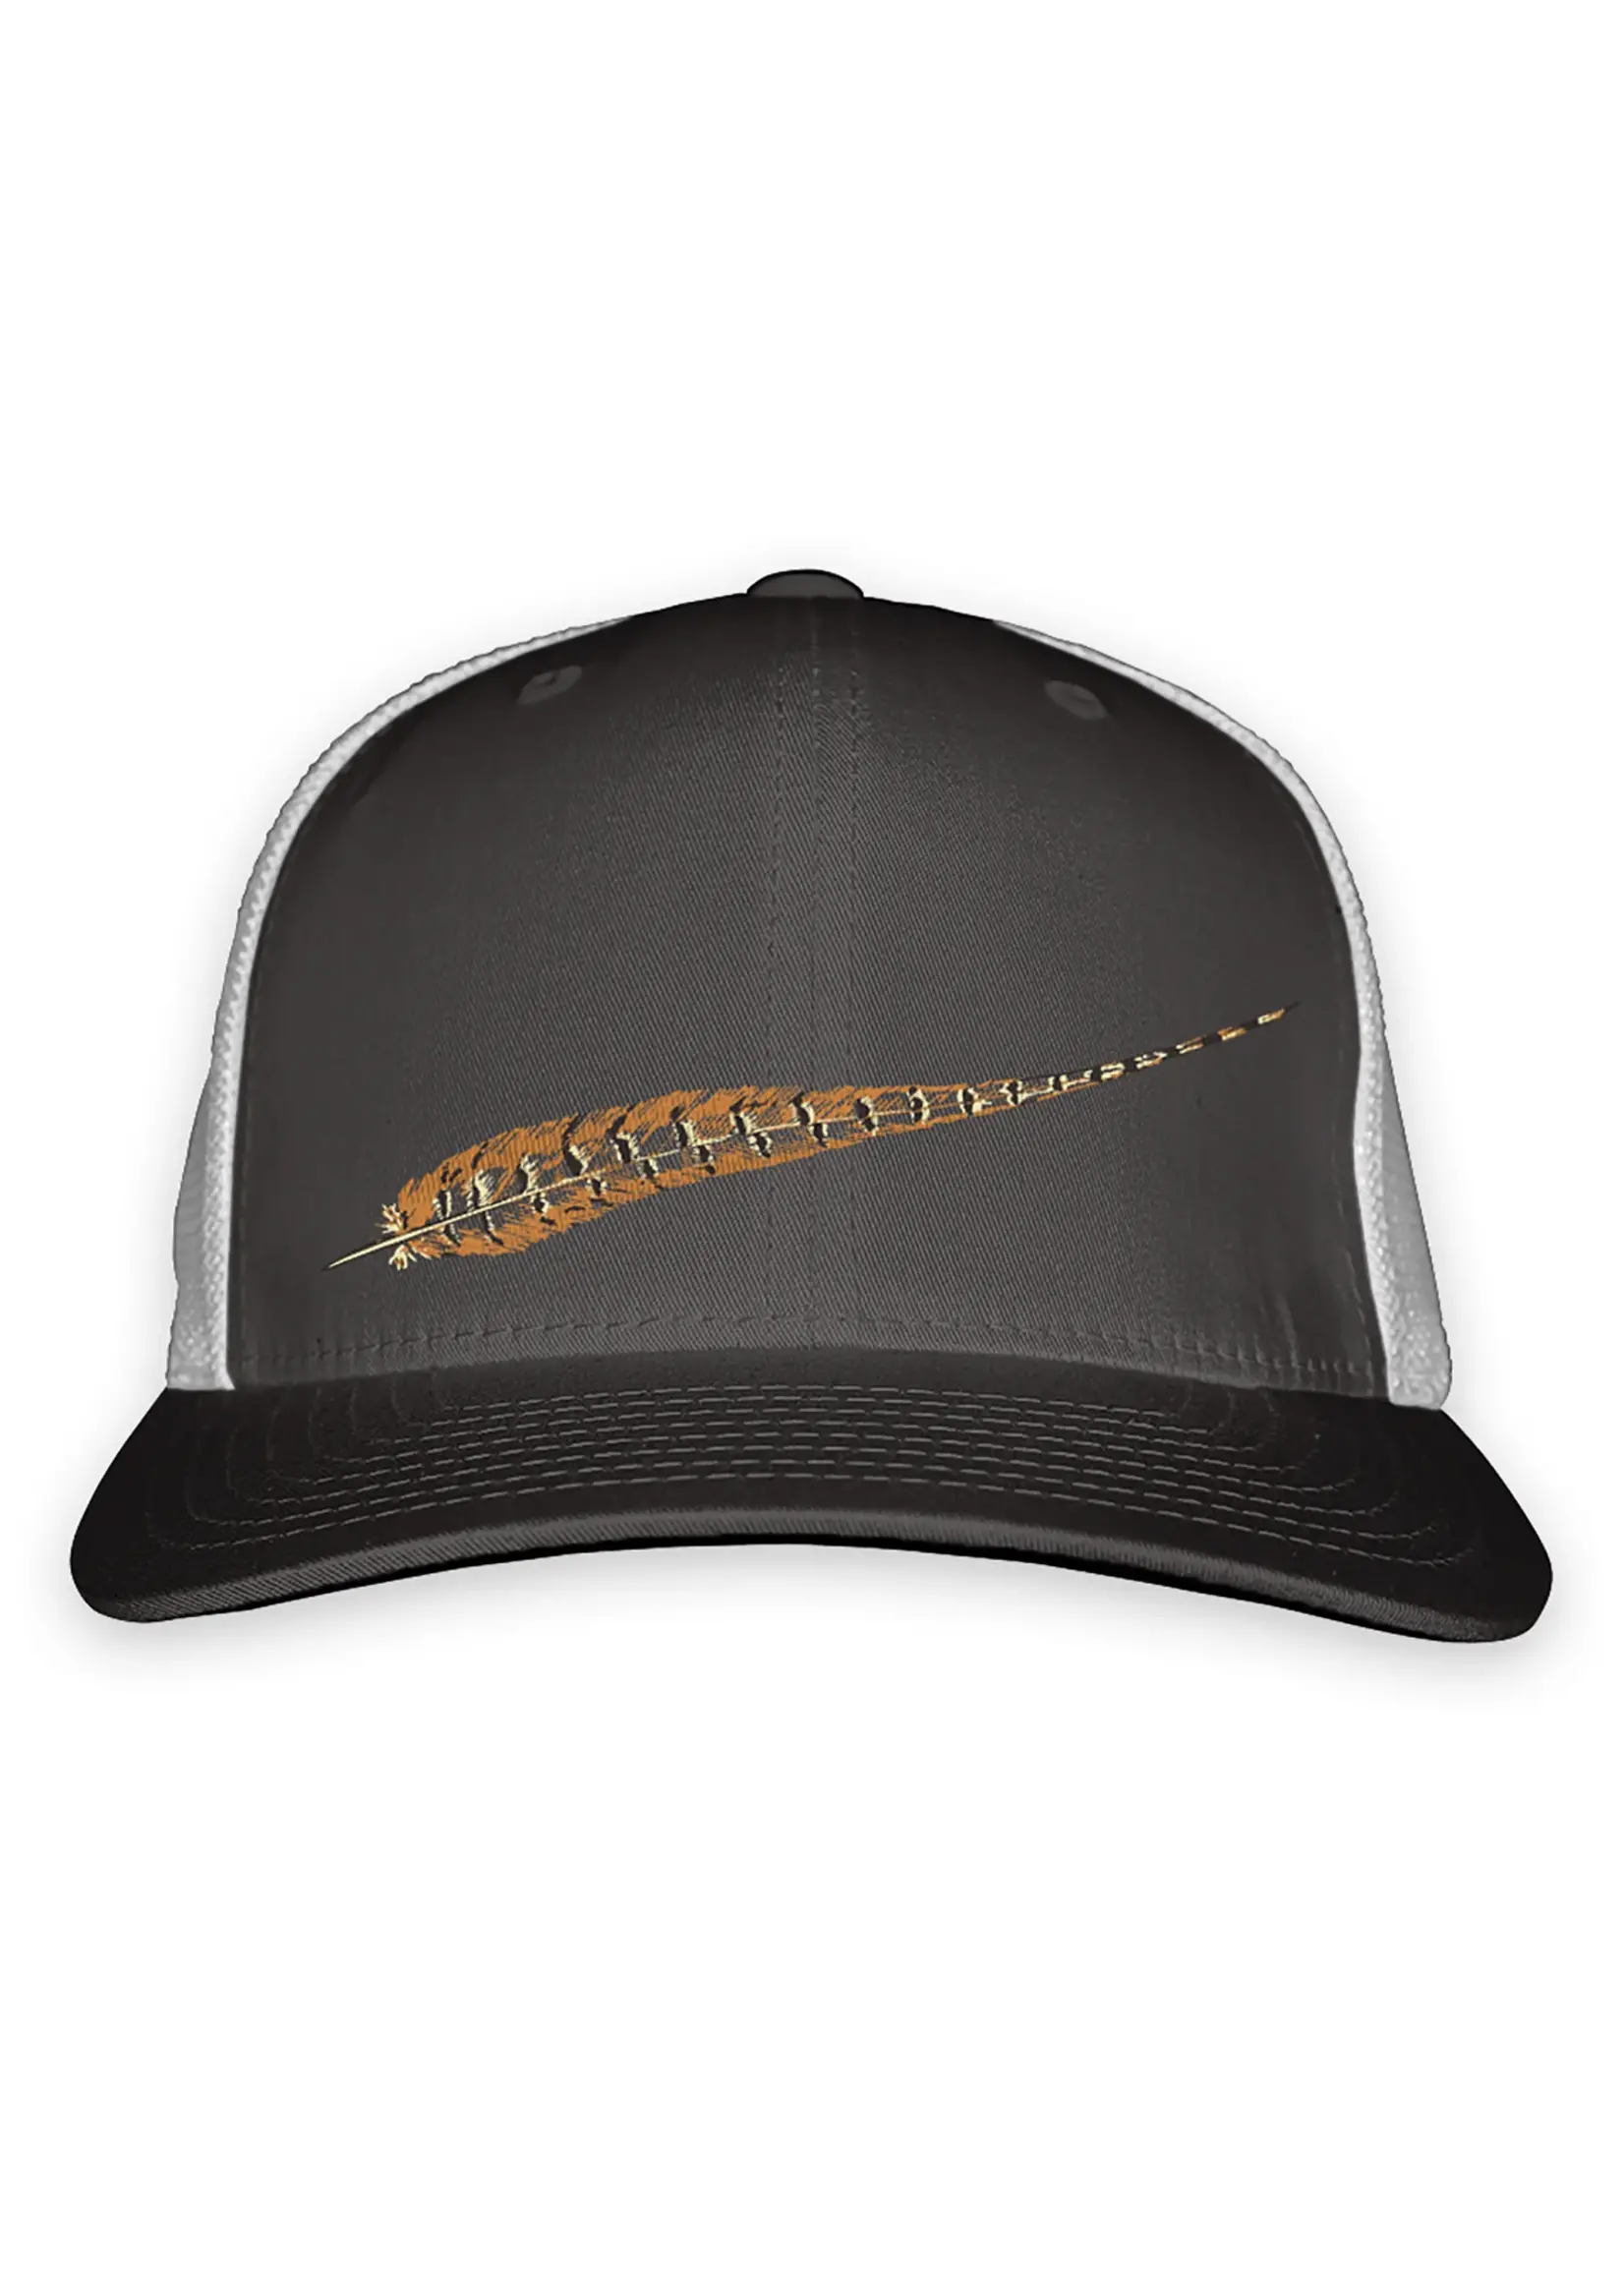 Rep Your Water Rep Your Water Pheasant Tail Standard Fit Hat